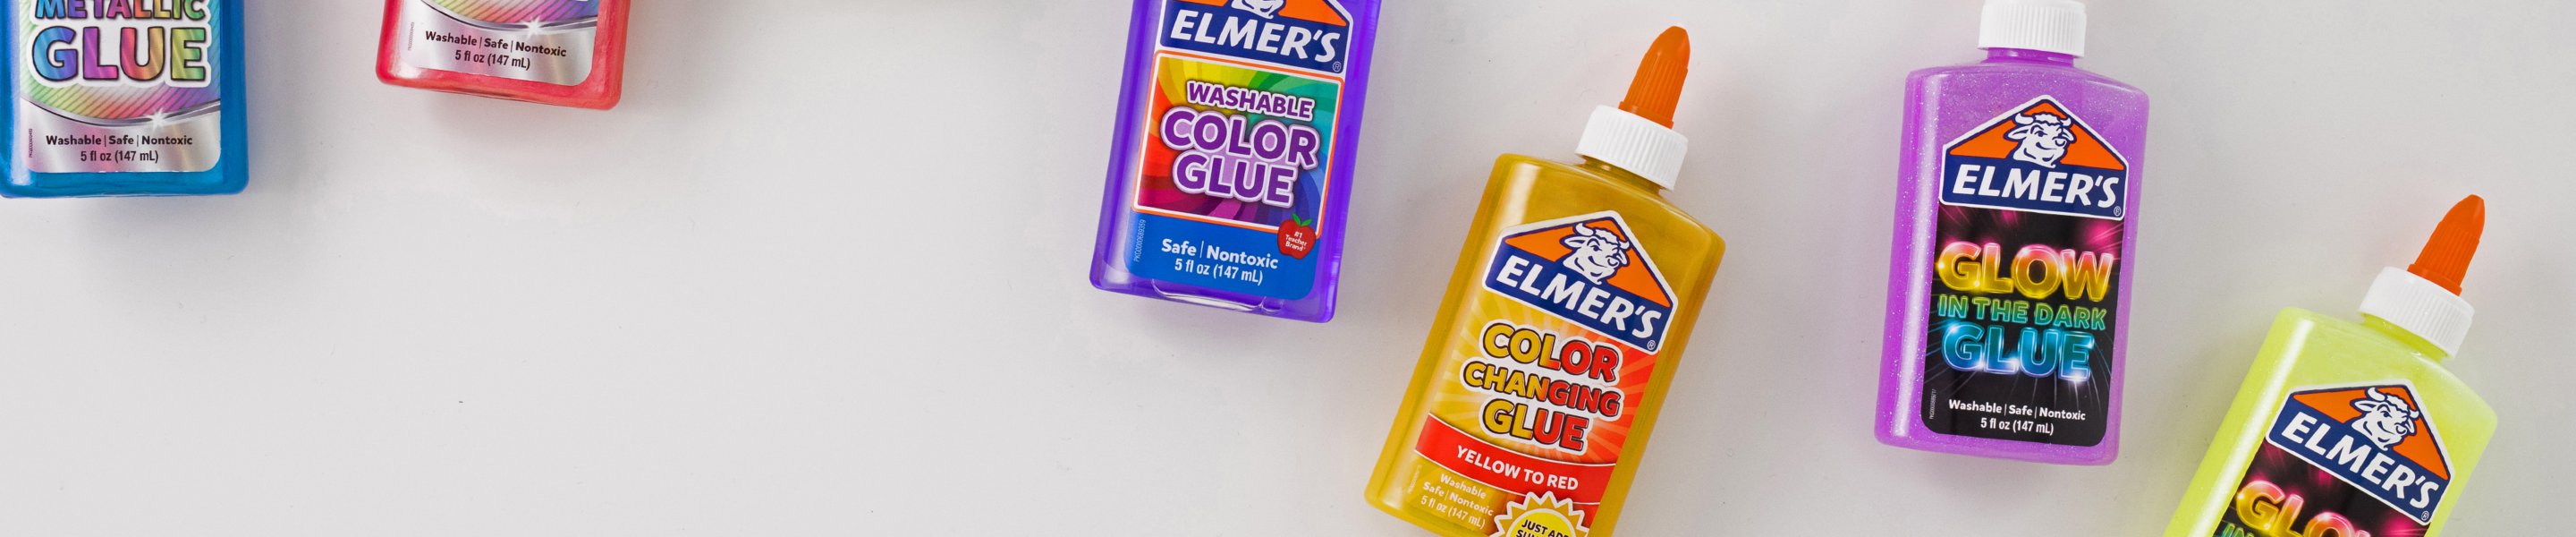 Color changing and washable glue assortment